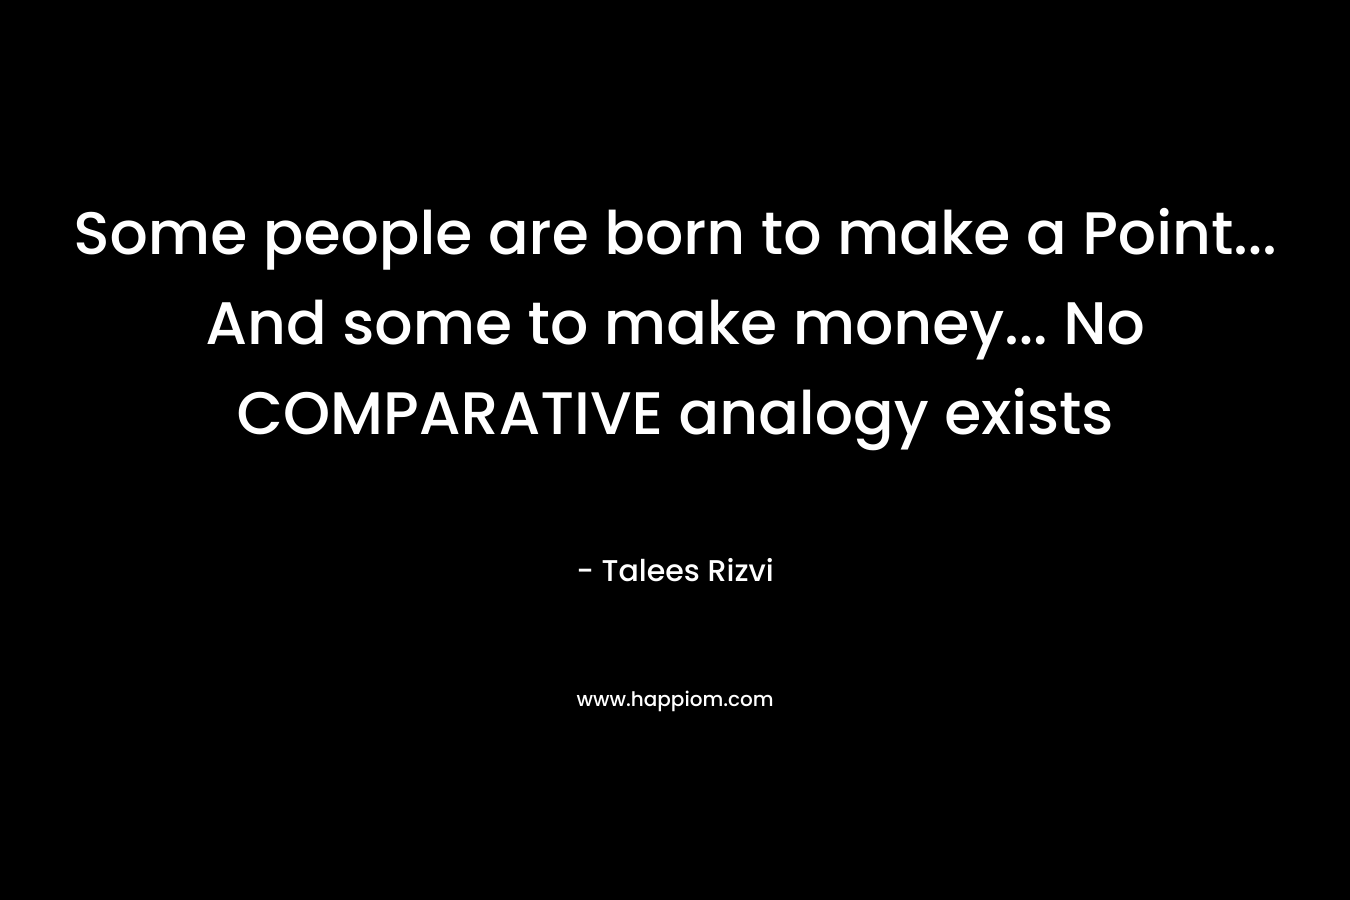 Some people are born to make a Point... And some to make money... No COMPARATIVE analogy exists